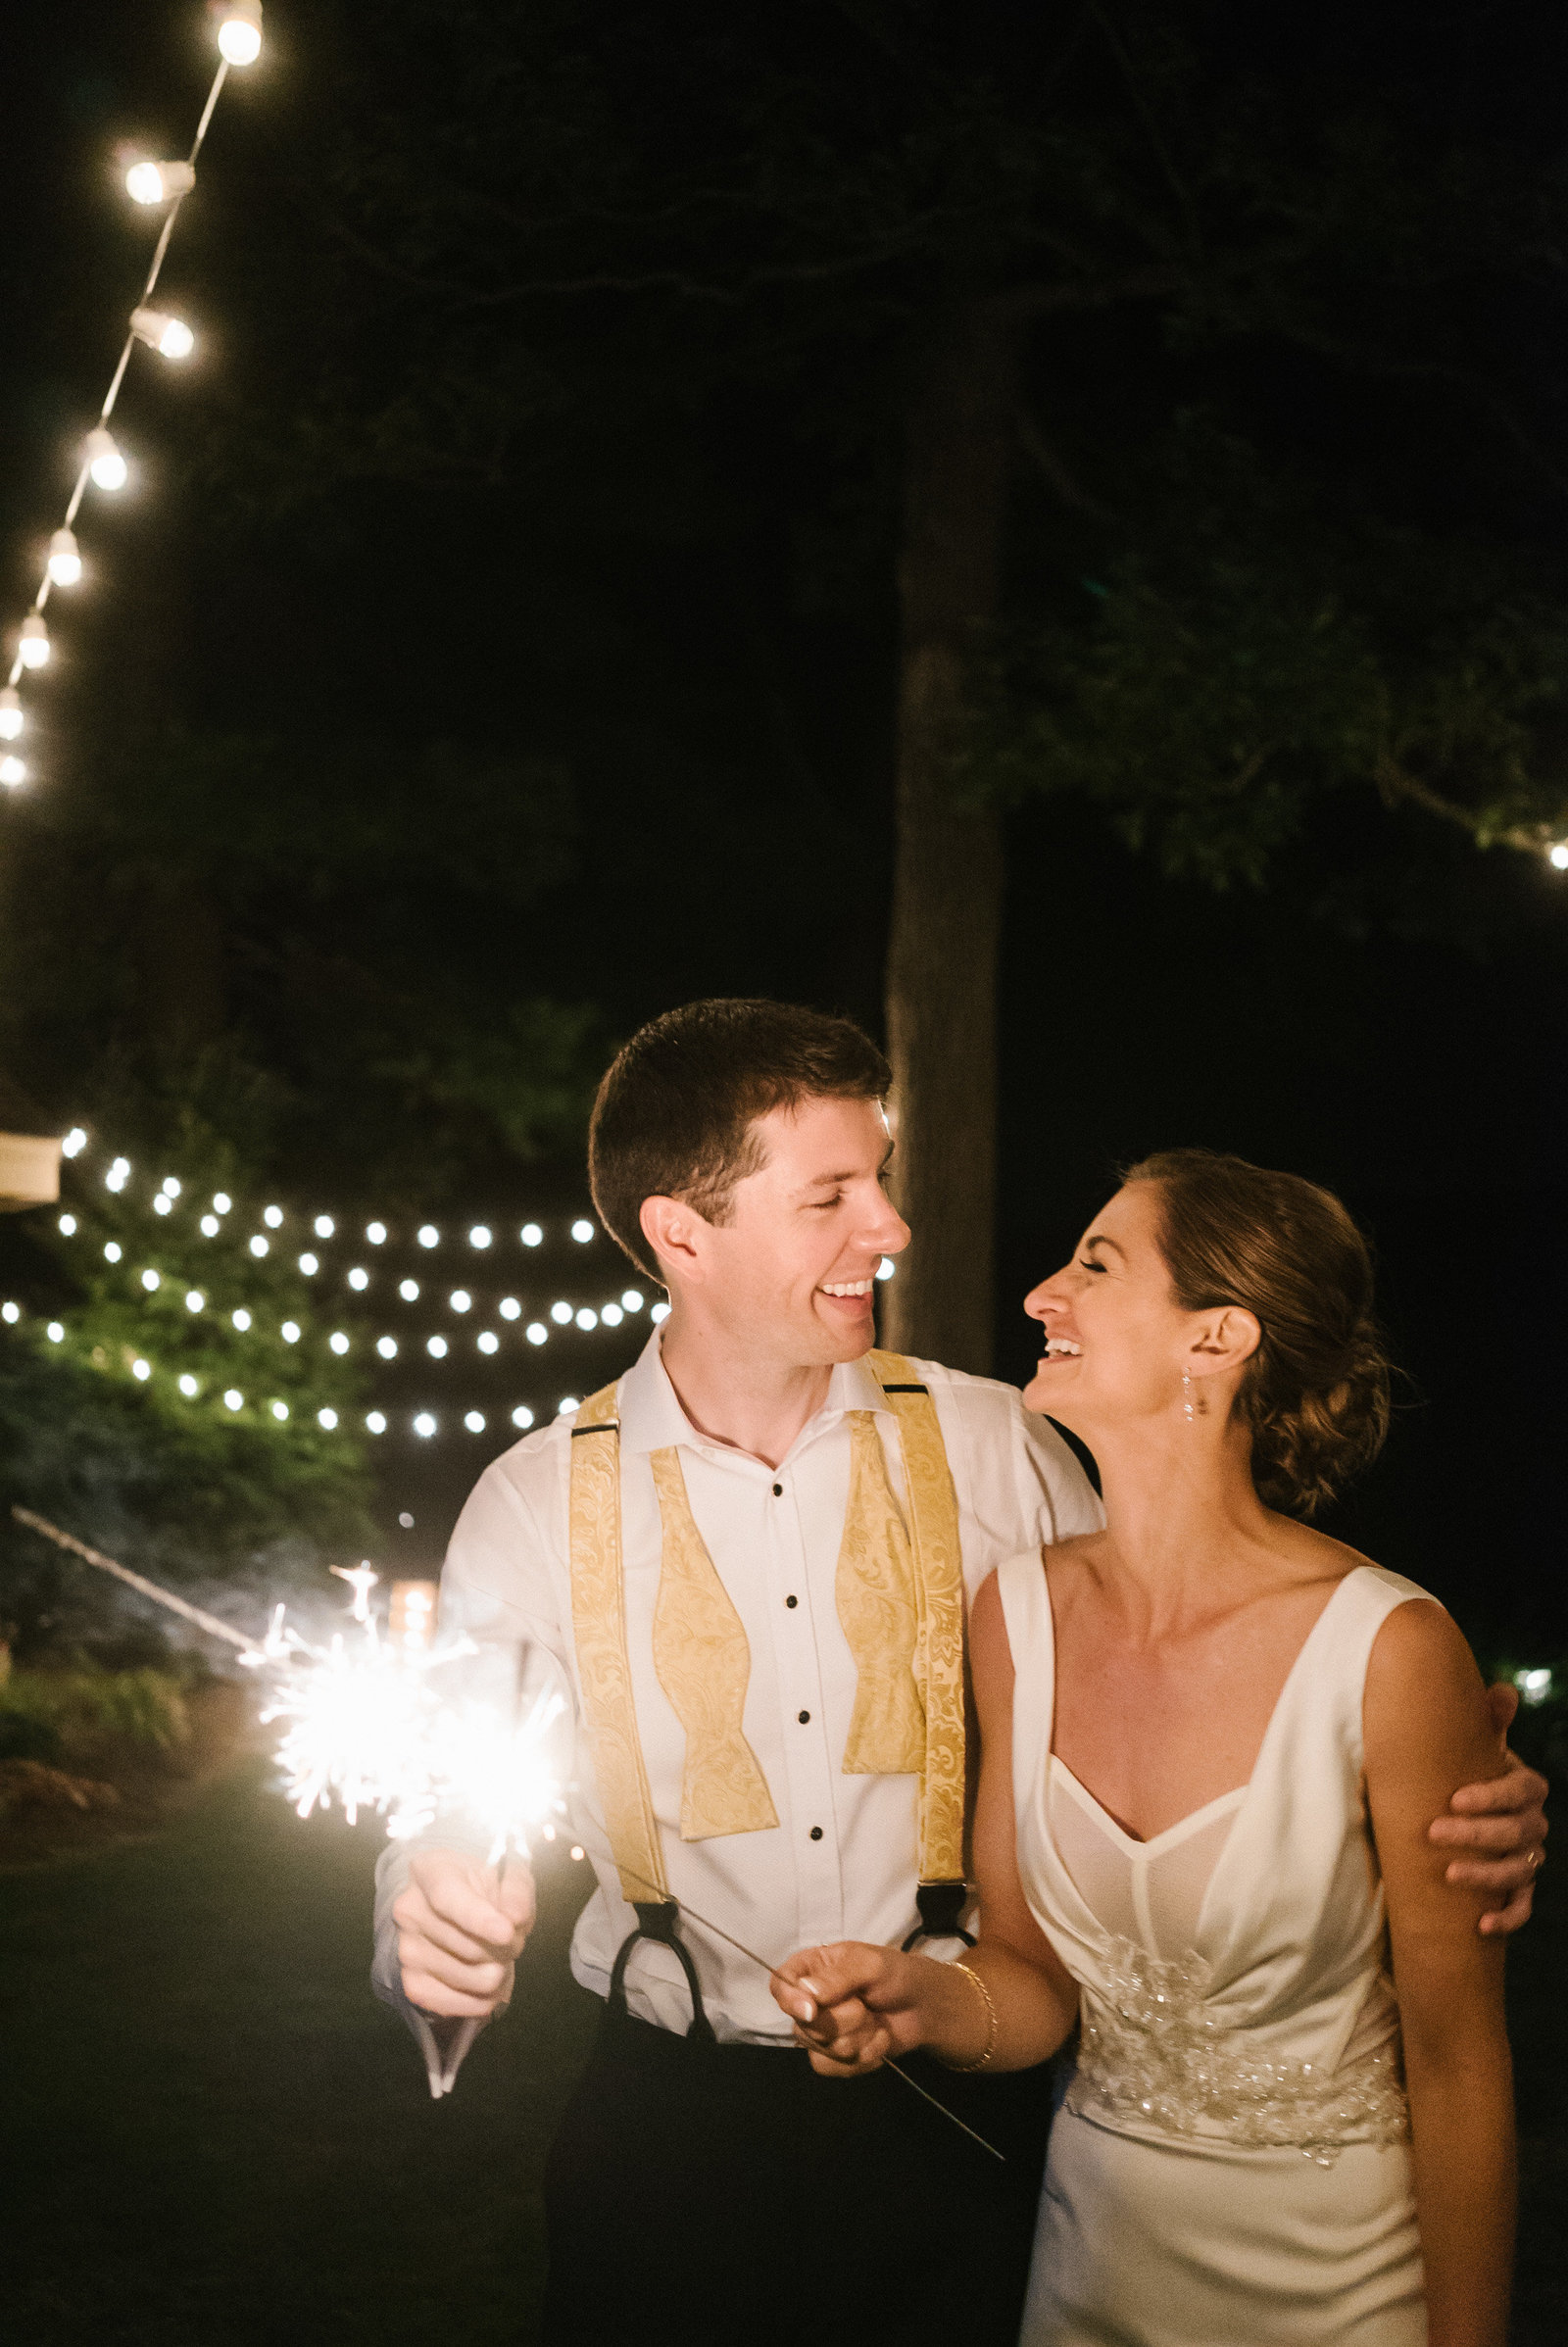 Sparkler fun before the night comes down to a close at this garden wedding at Grace Winery.